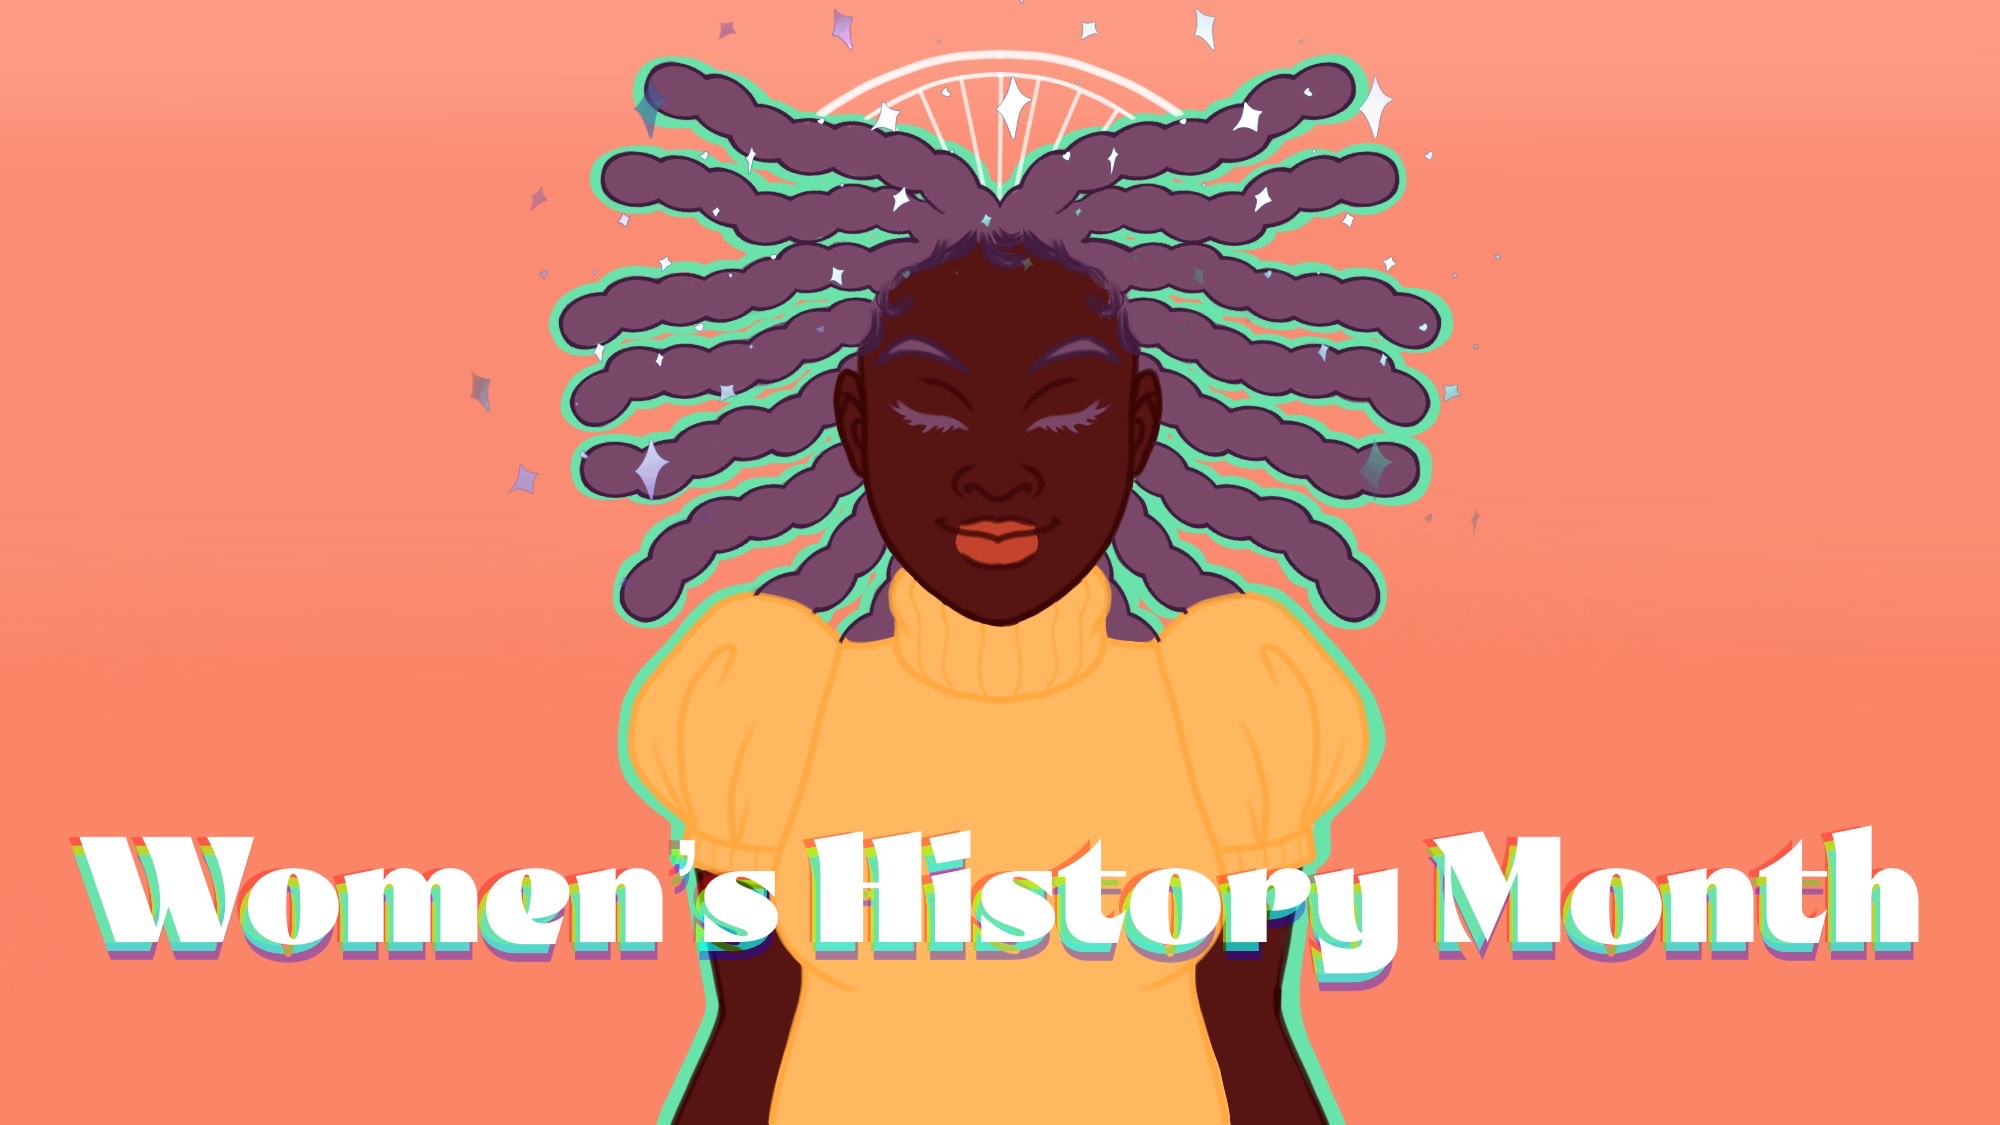 Image: A digital illustration of a Black femme person closing their eyes while facing towards the viewer. The person has purple hair and wears a yellow shirt. Text reads: "Women's History Month" towards the bottom of the composition. Image by Teshika Silver.